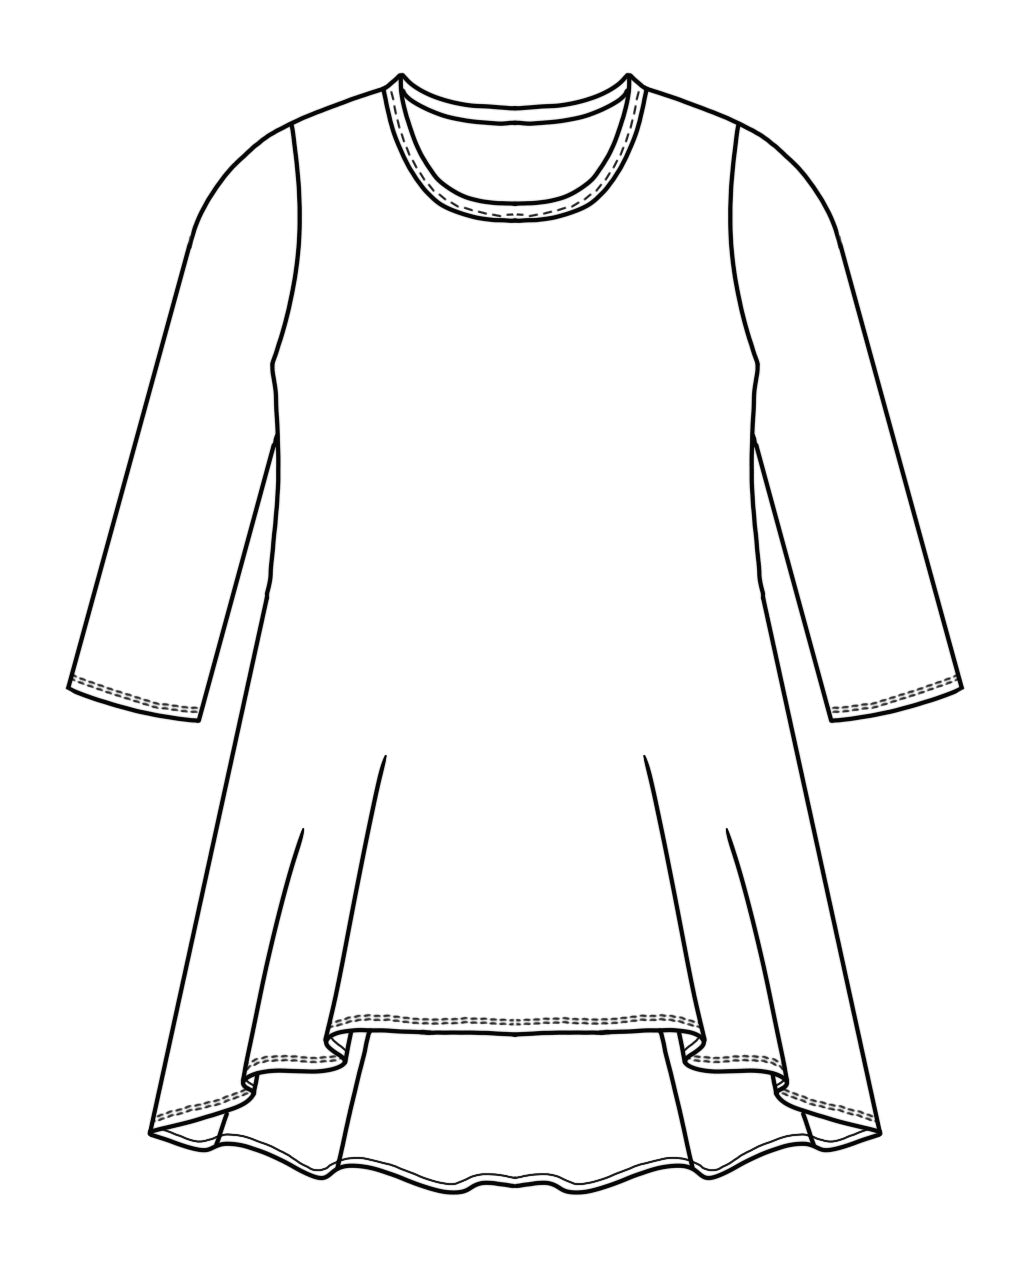 flat drawing of a 3/4 sleeve top